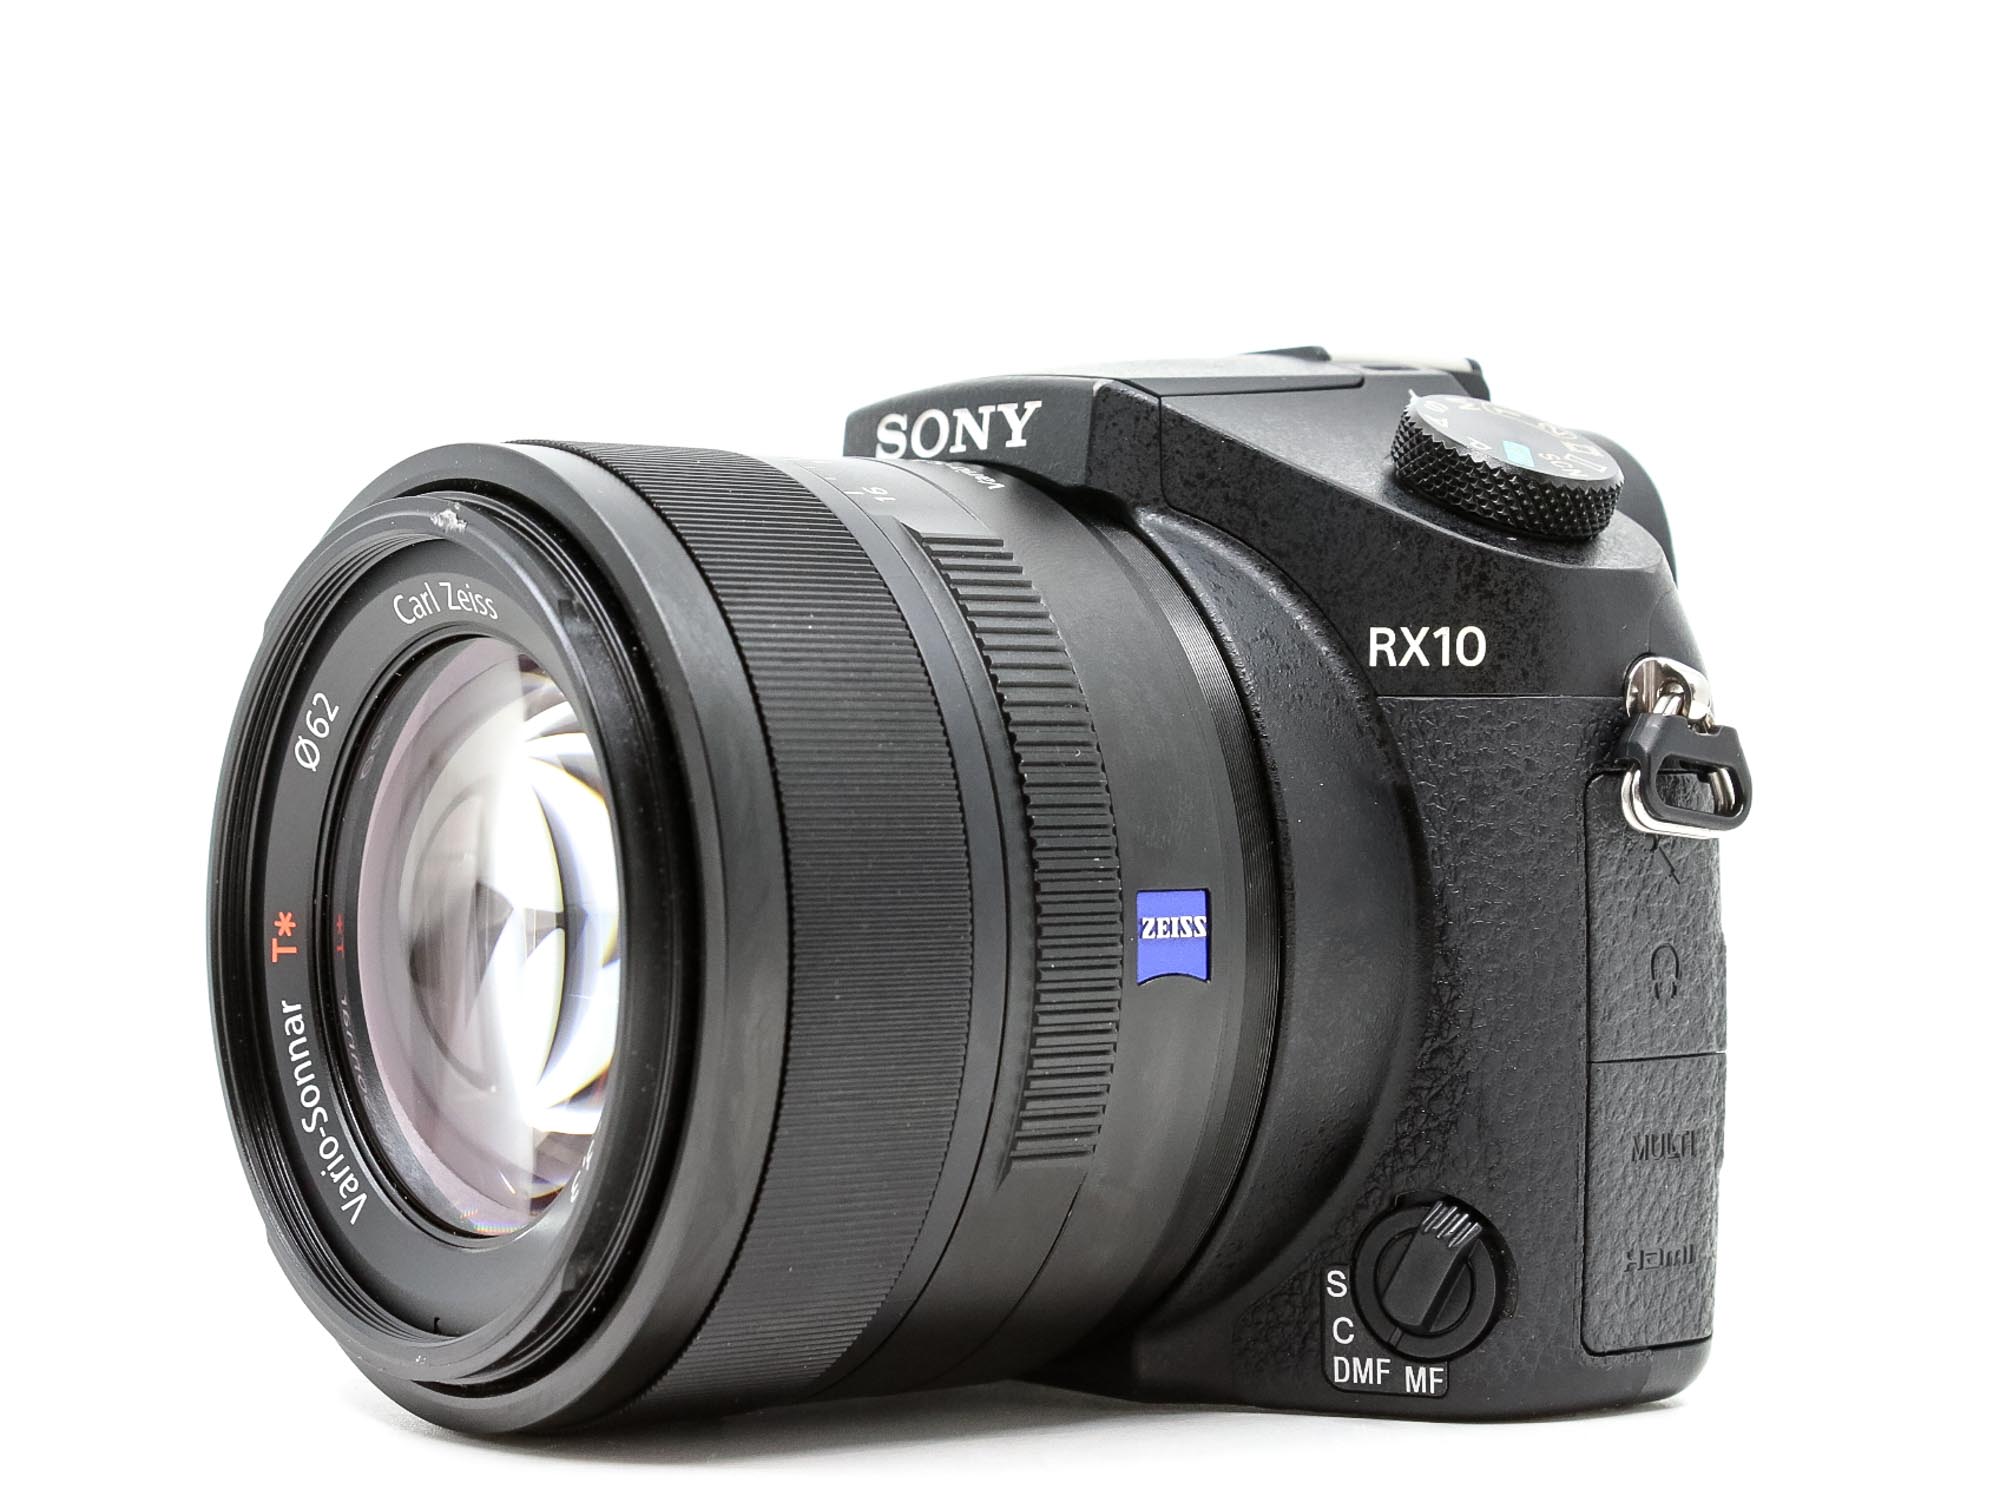 Sony Cyber-shot RX10 (Condition: Excellent)